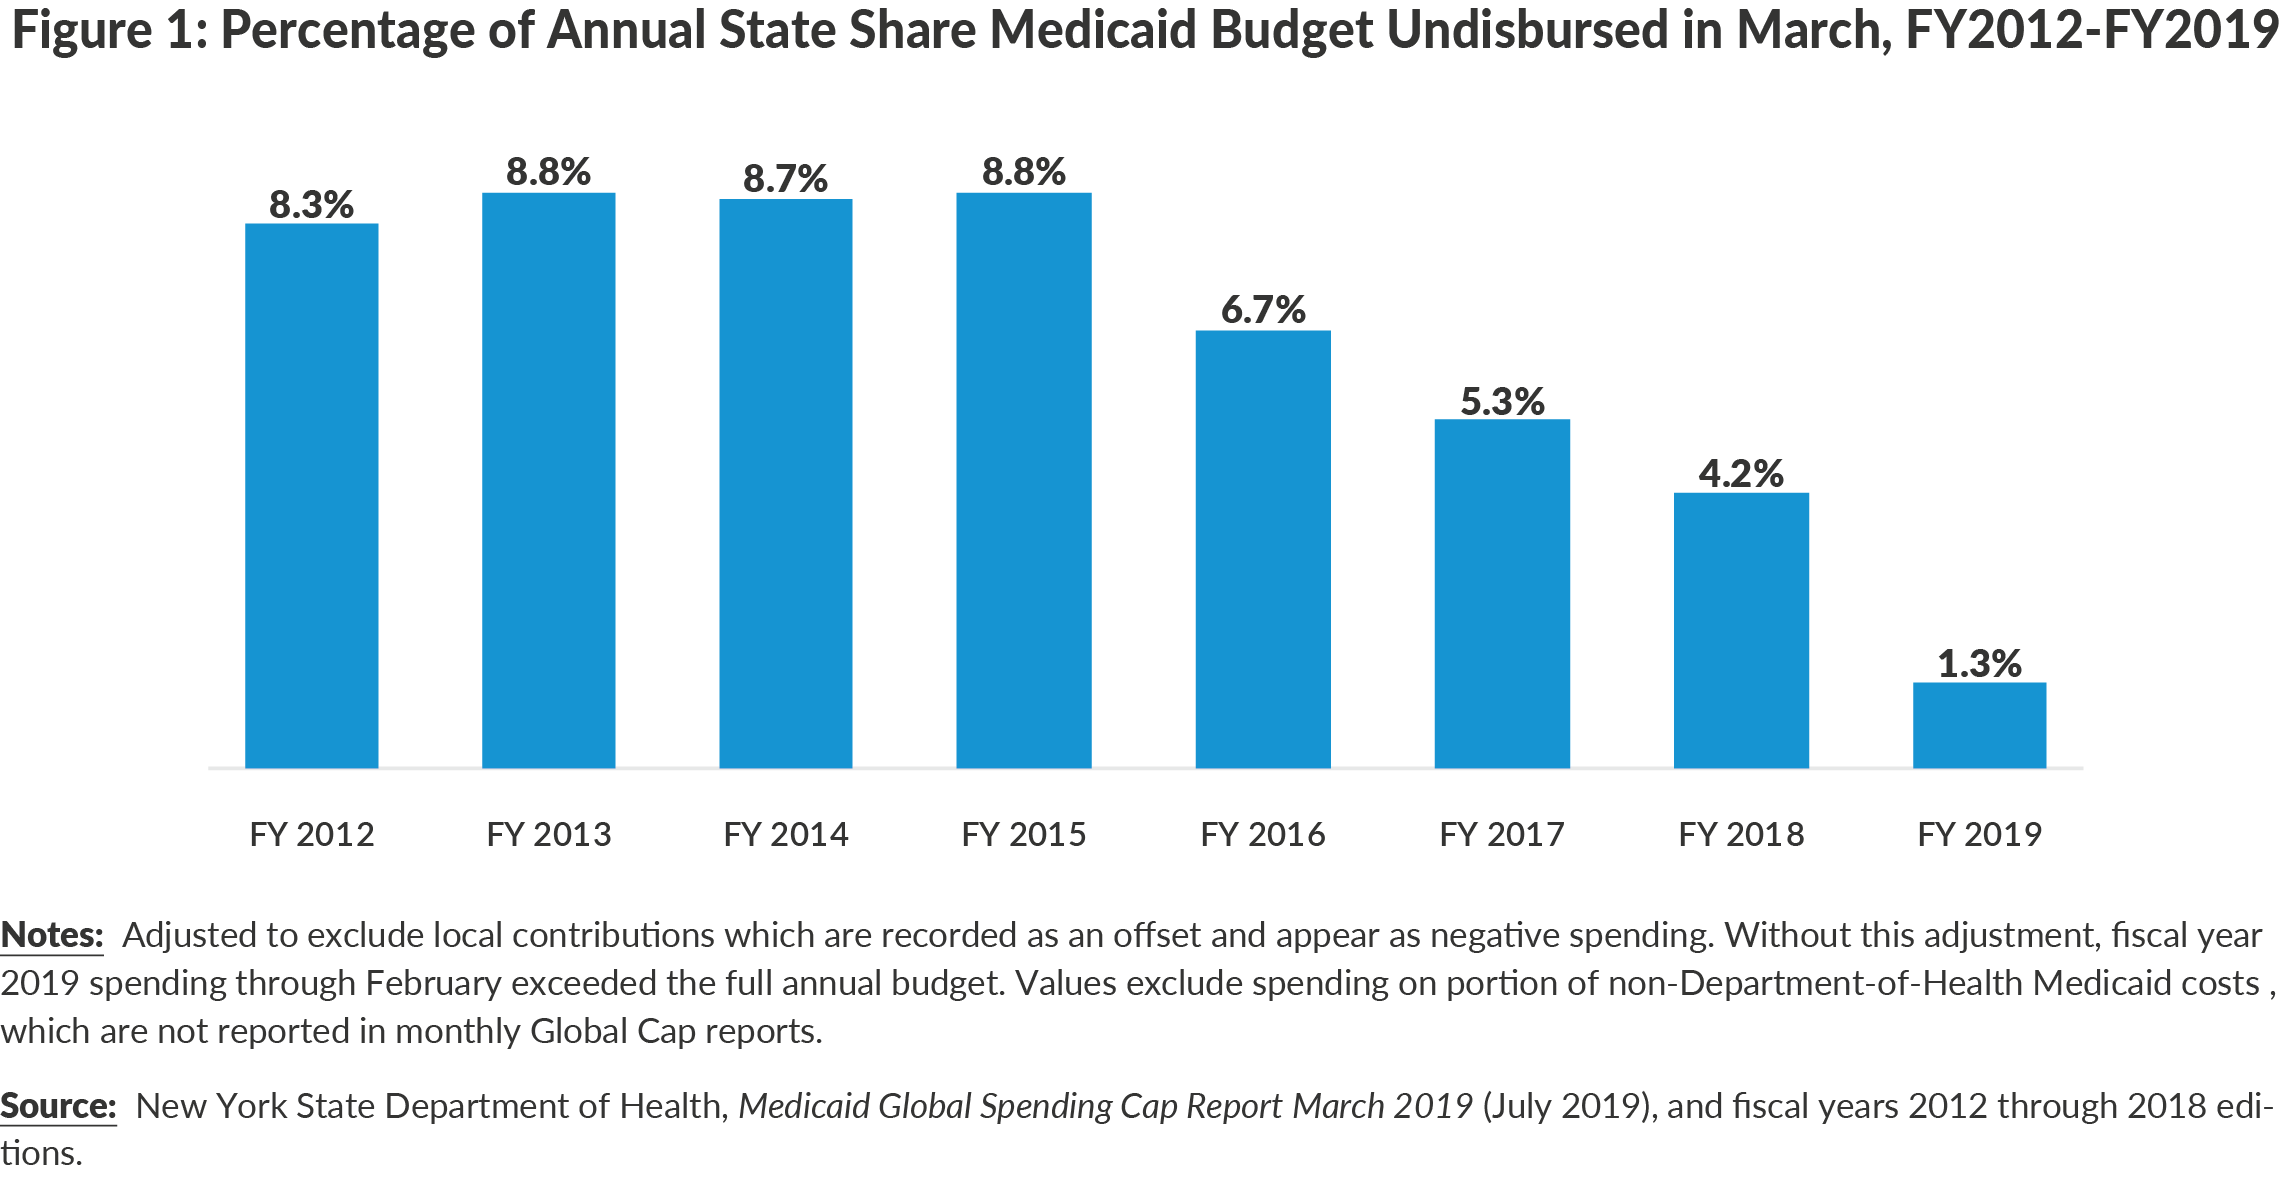 Figure 1: Percentage of Annual State Share Medicaid Budget Undisbursed in March, FY2012-FY2019